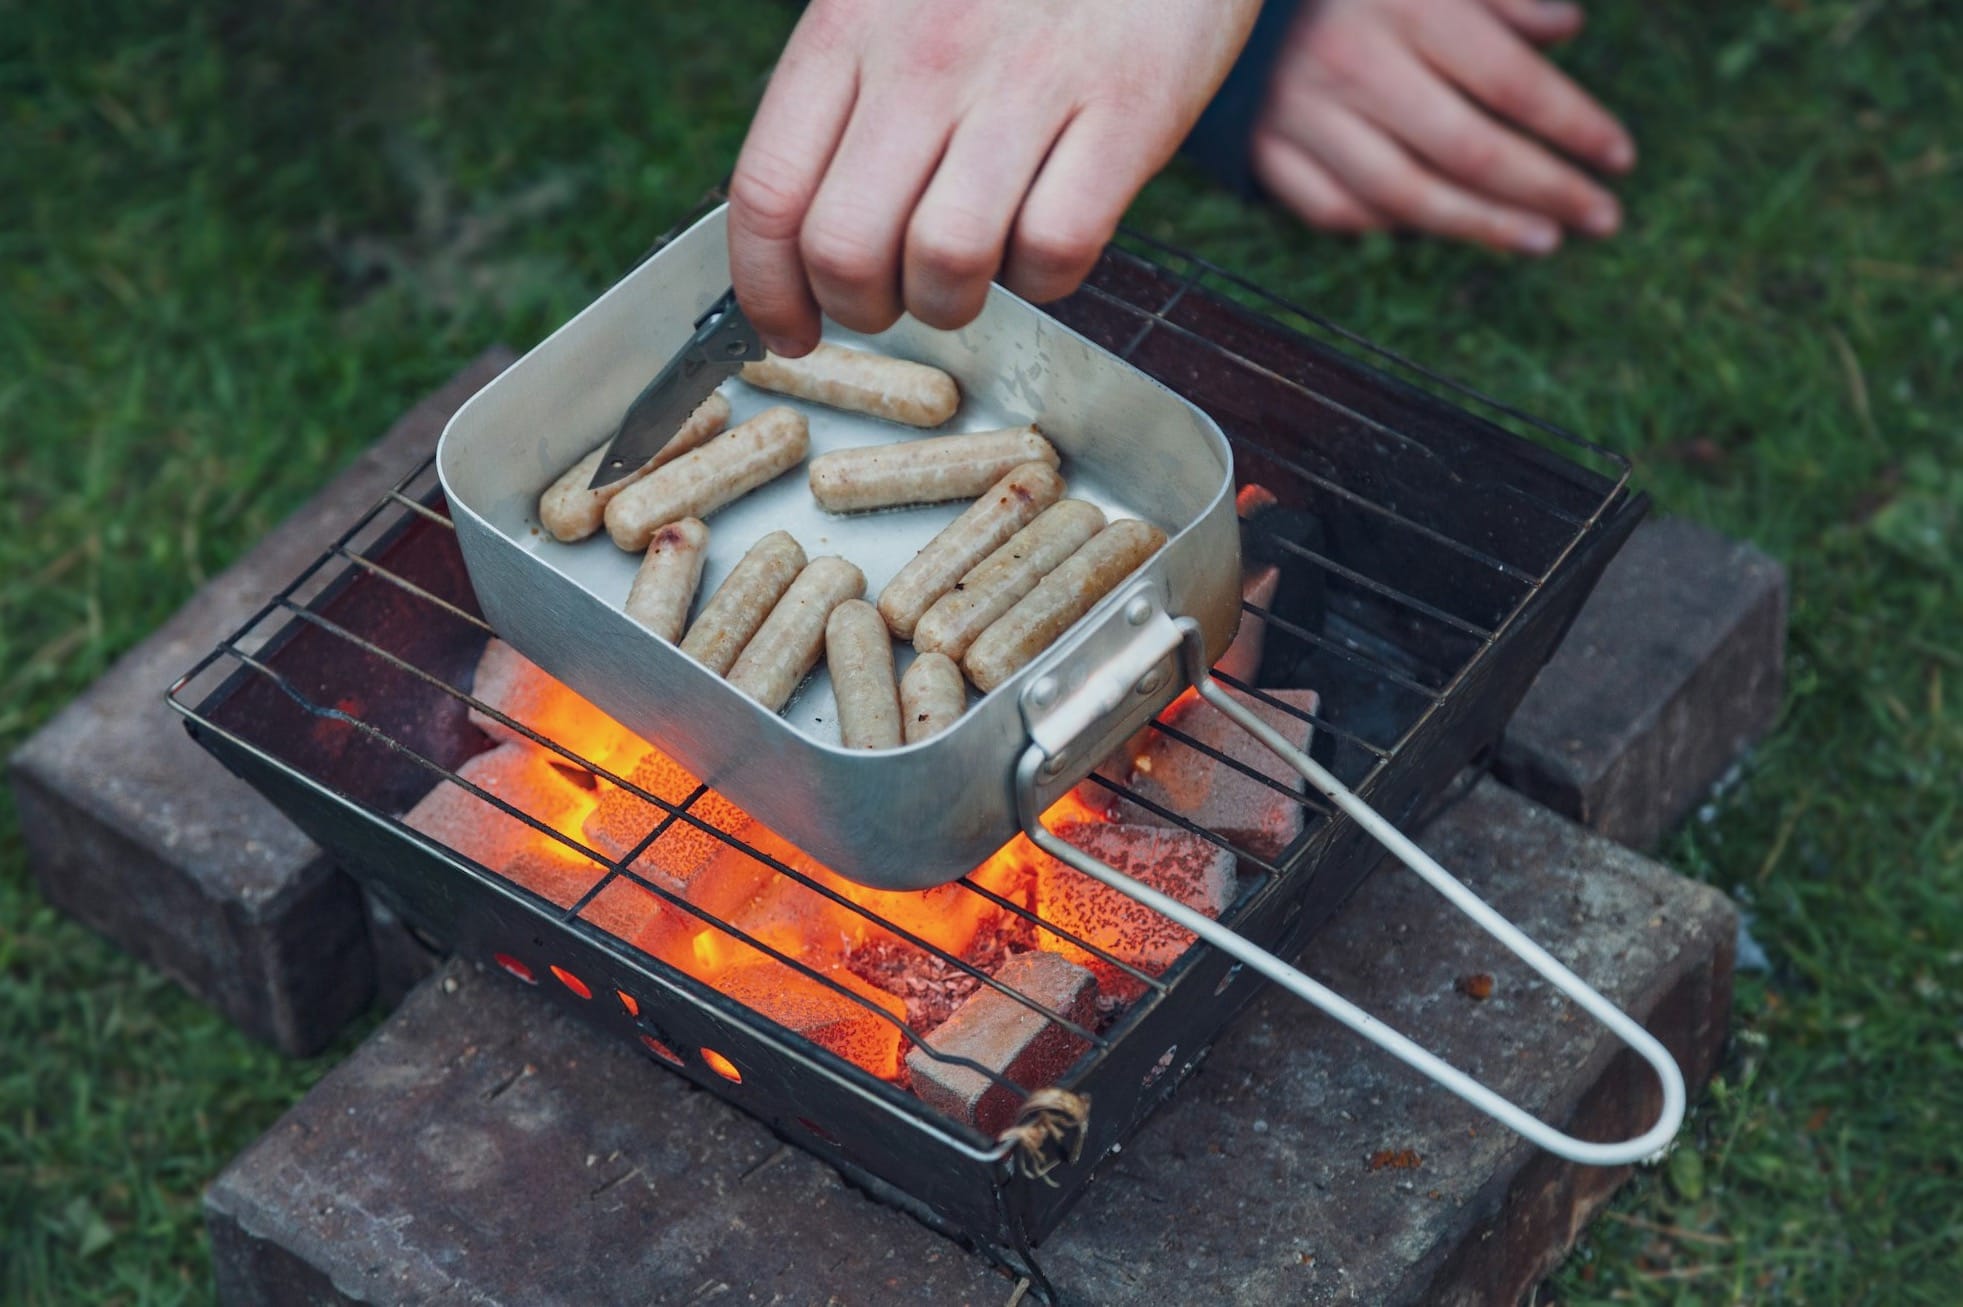 pan of uncooked sausages on grill